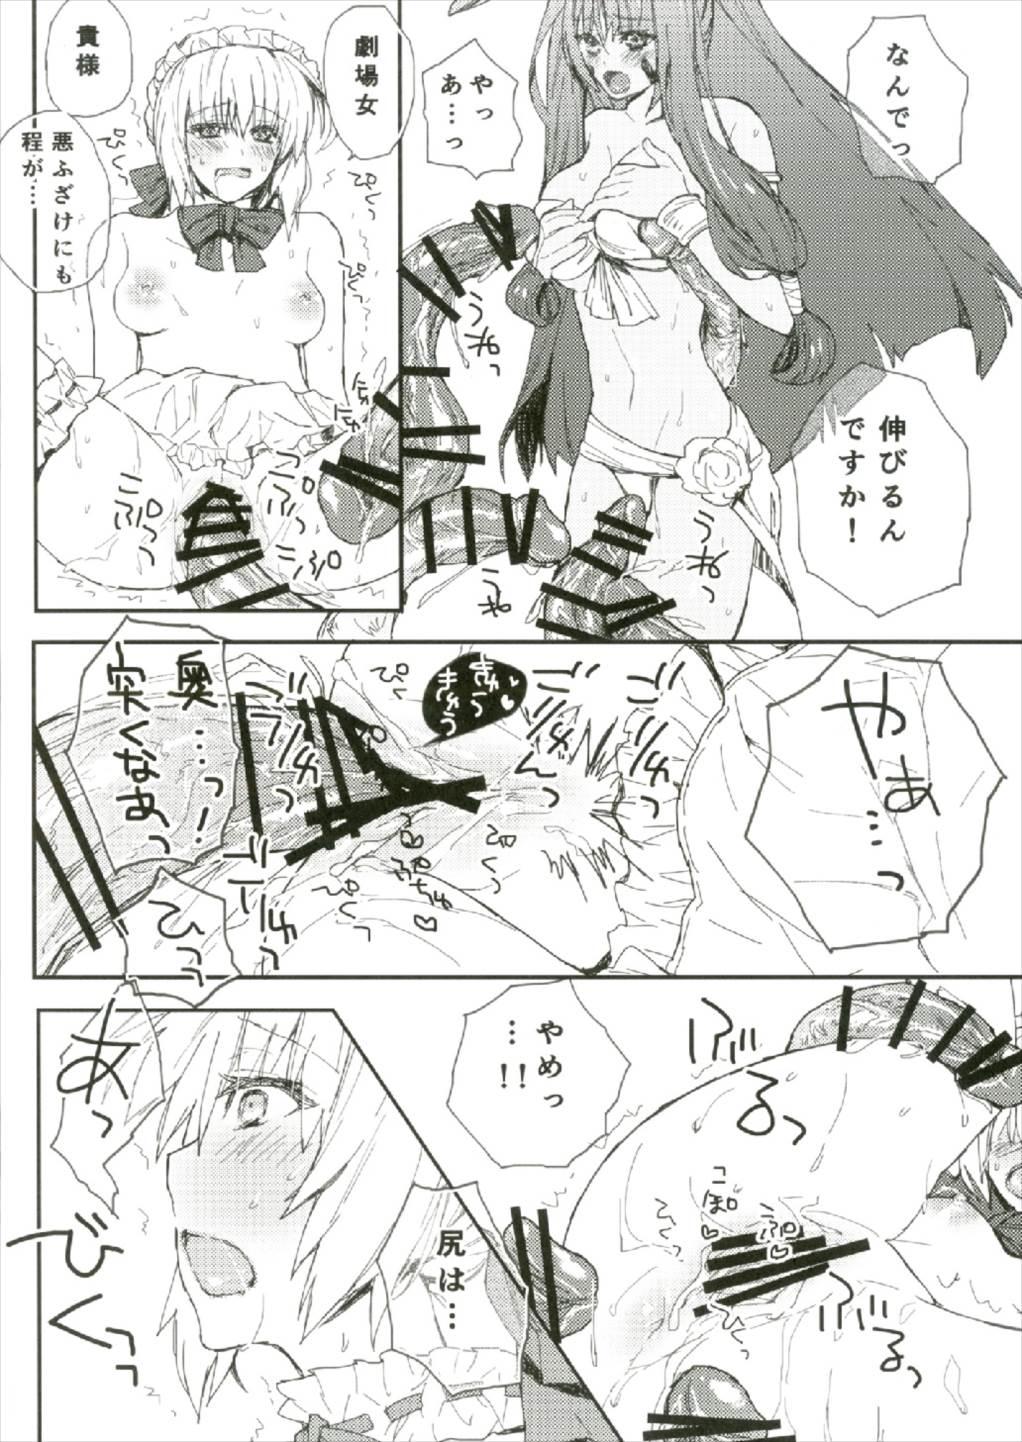 Women Sucking Dicks 夏の馬鹿ンス - Fate grand order Brother - Page 6